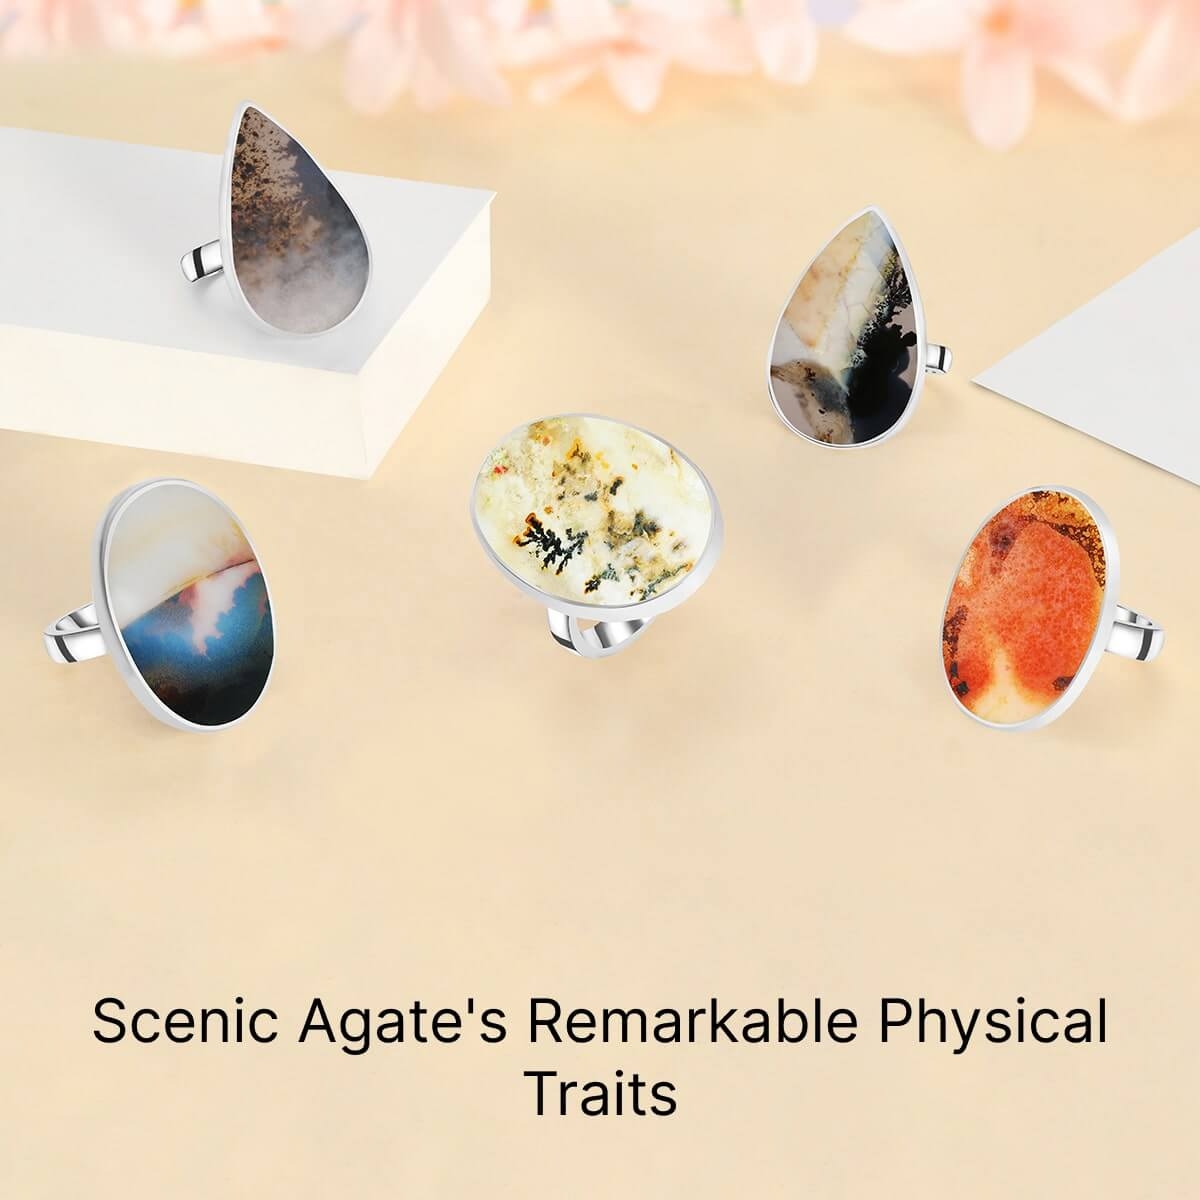 Physical Properties of Scenic Agate Stone